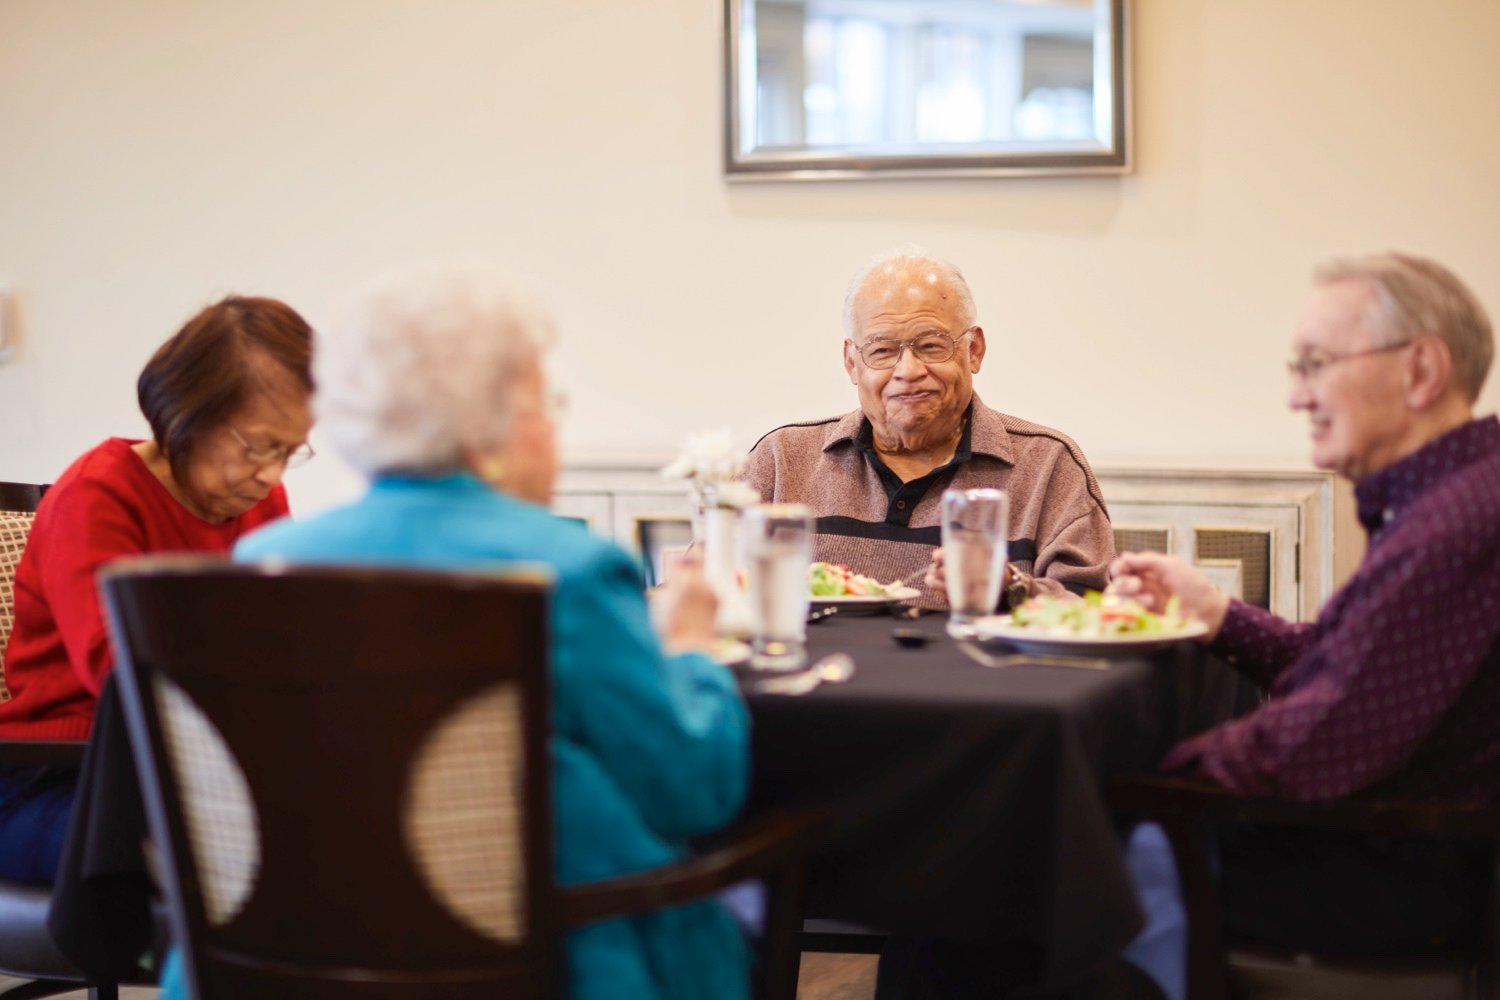 A senior resident enjoying a meal with friends in the community restaurant